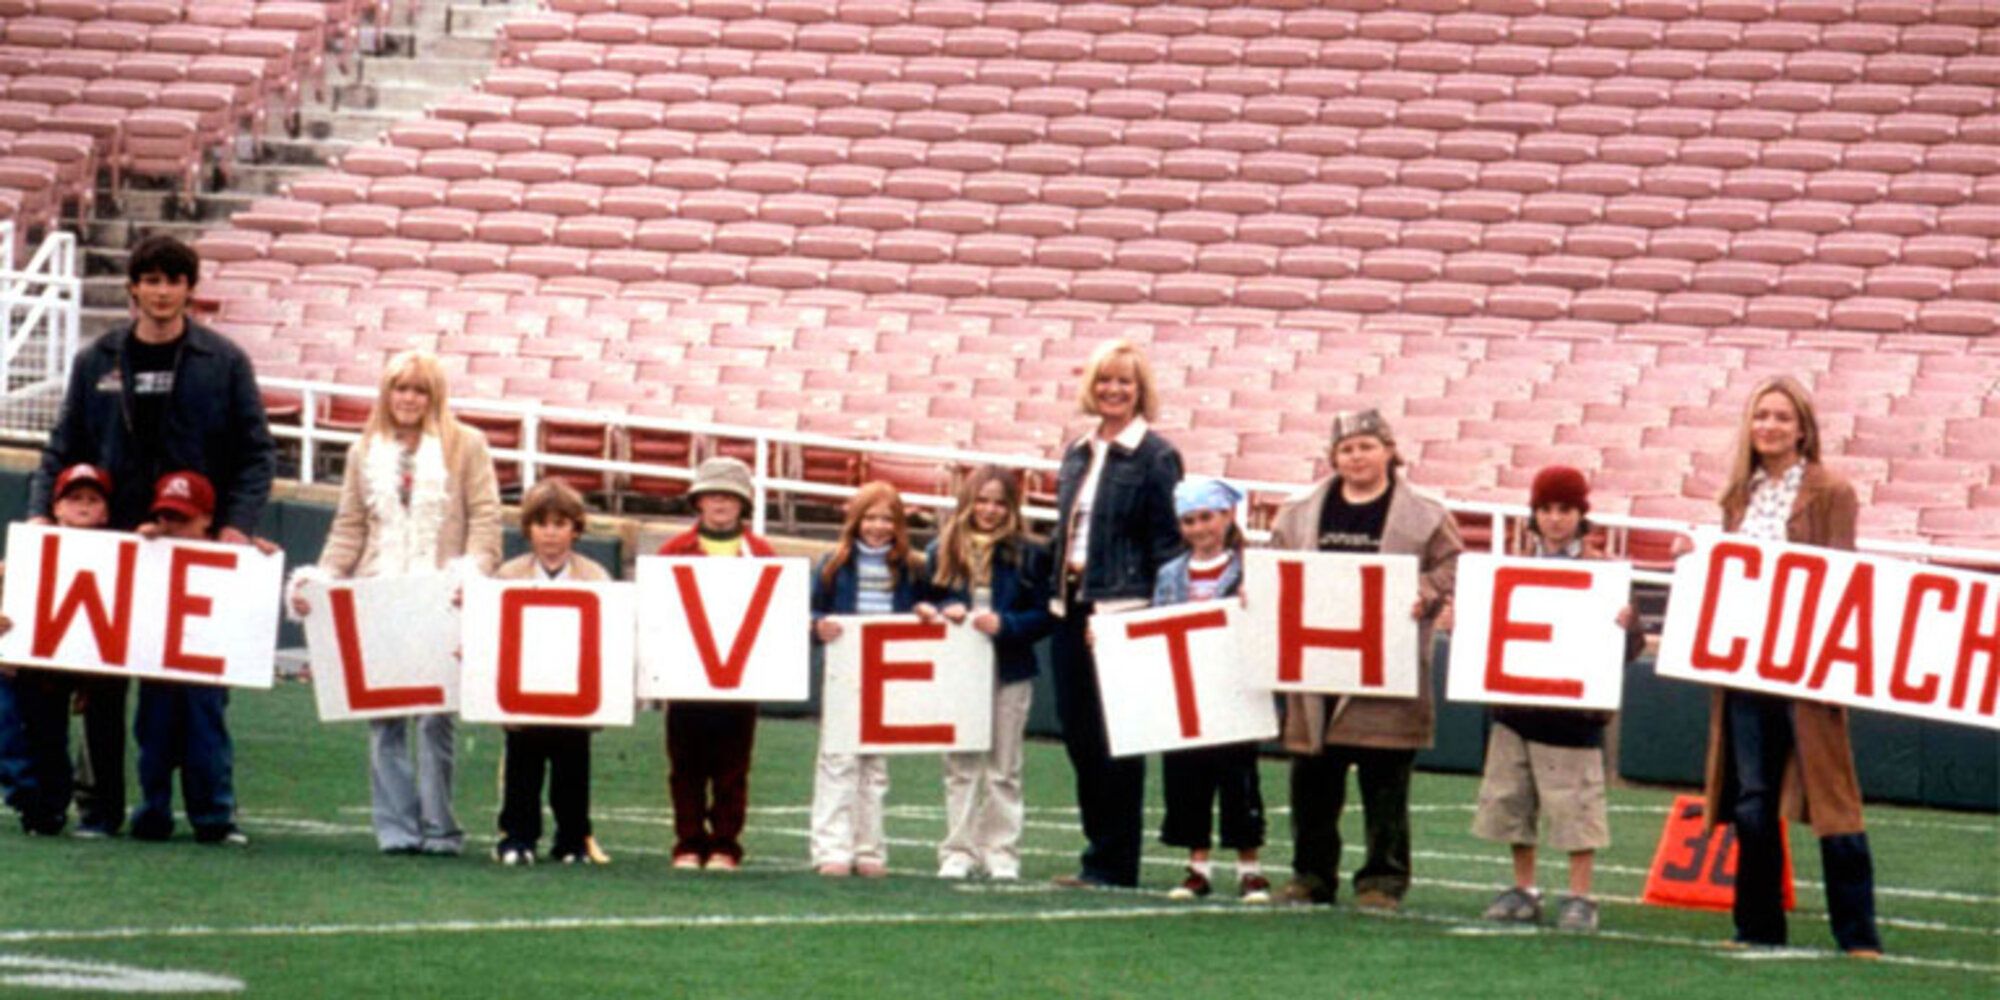 The Baker Children on a football pitch holding up signs saying 'We Love the Coach'